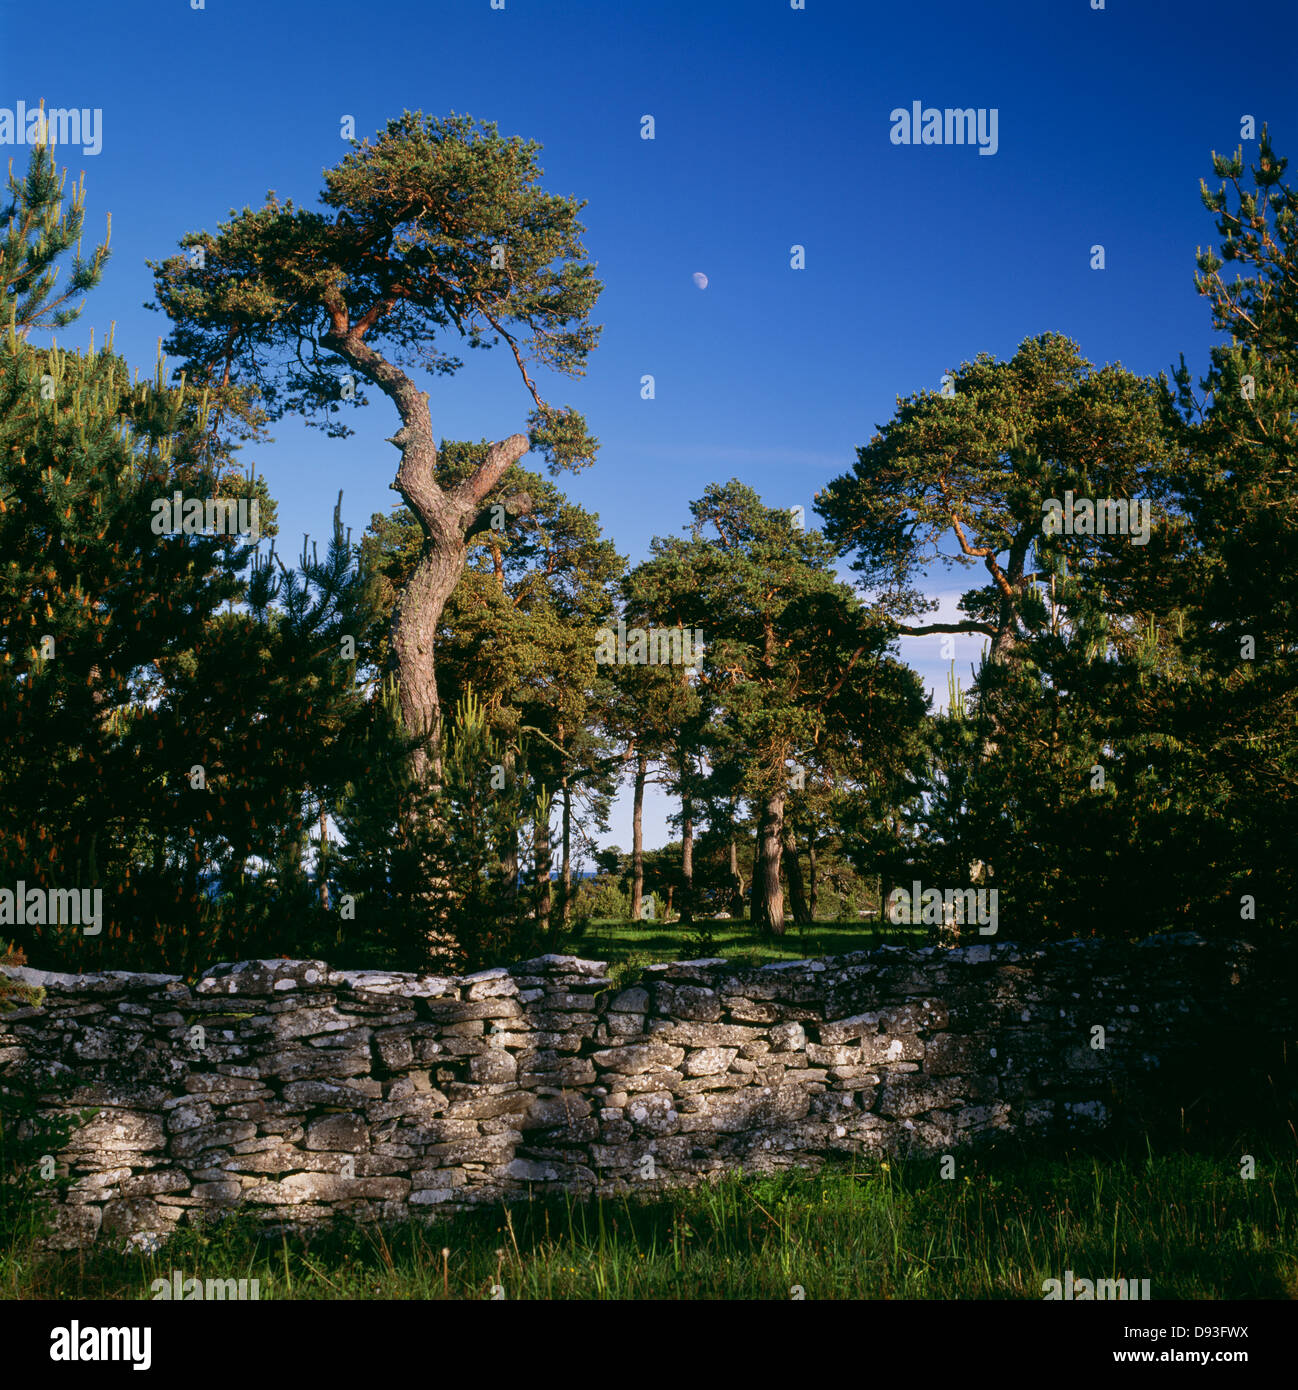 View of coniferous trees and stone wall Stock Photo